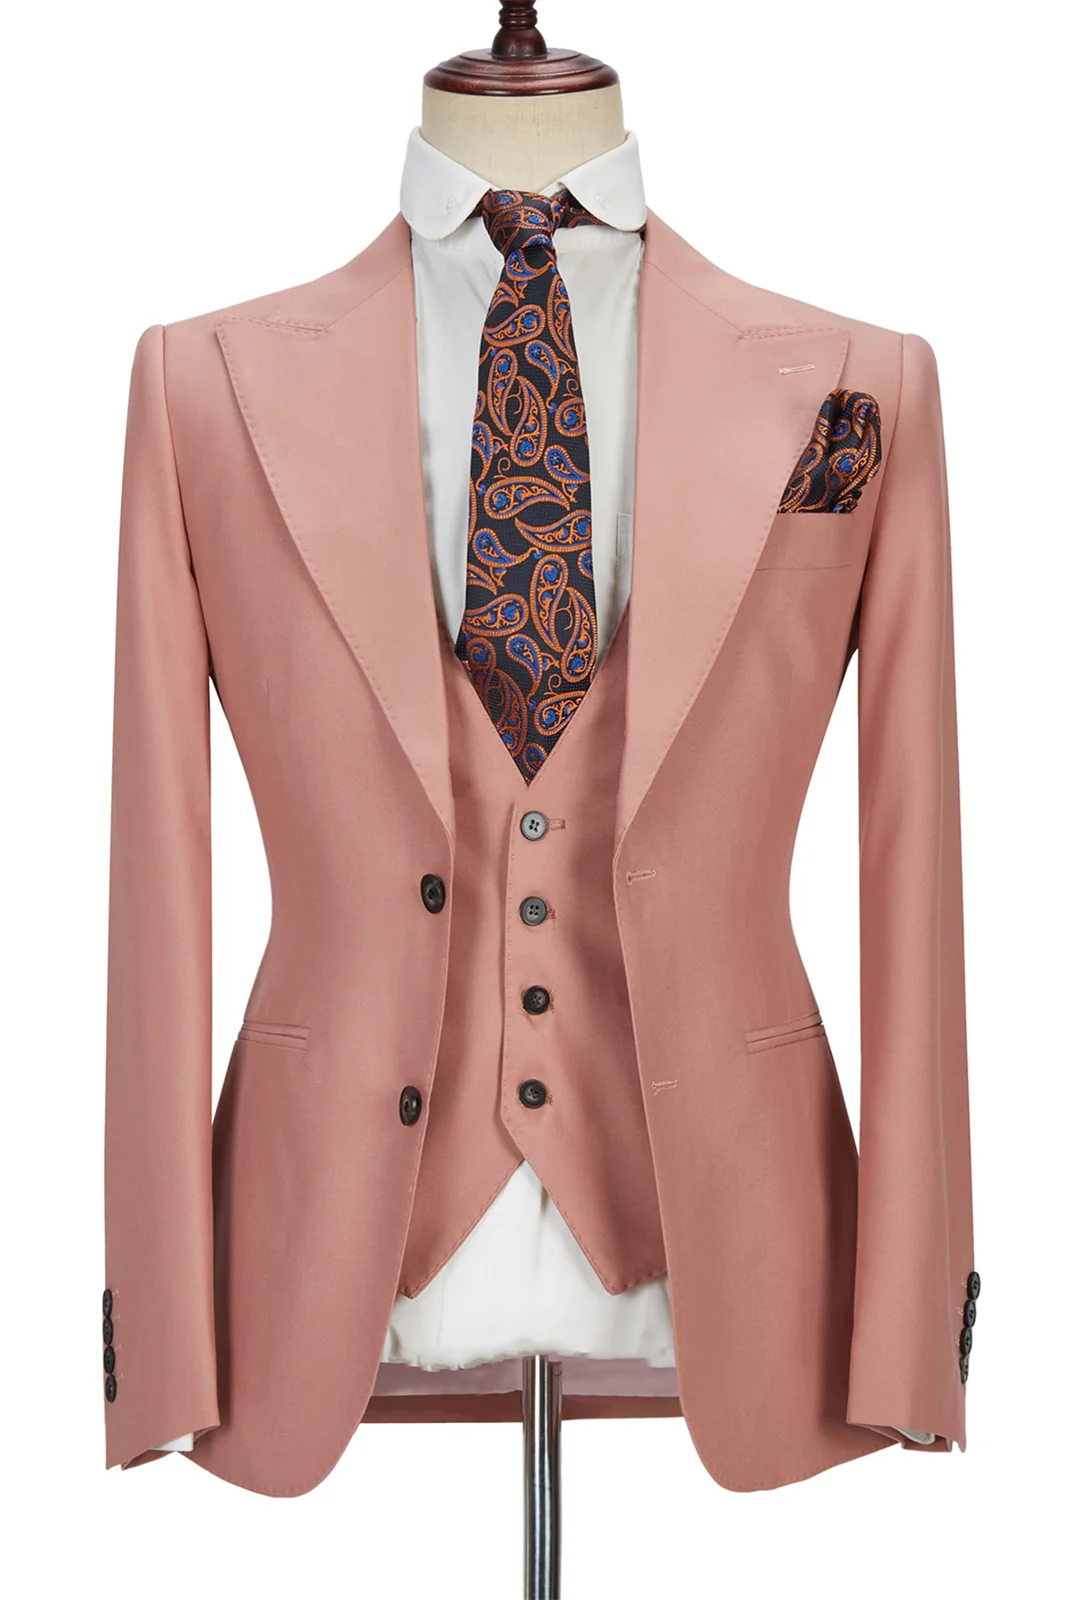 Pink 2 Buttons Marriage Suit 3 Pieces With Peak Lapel For Men